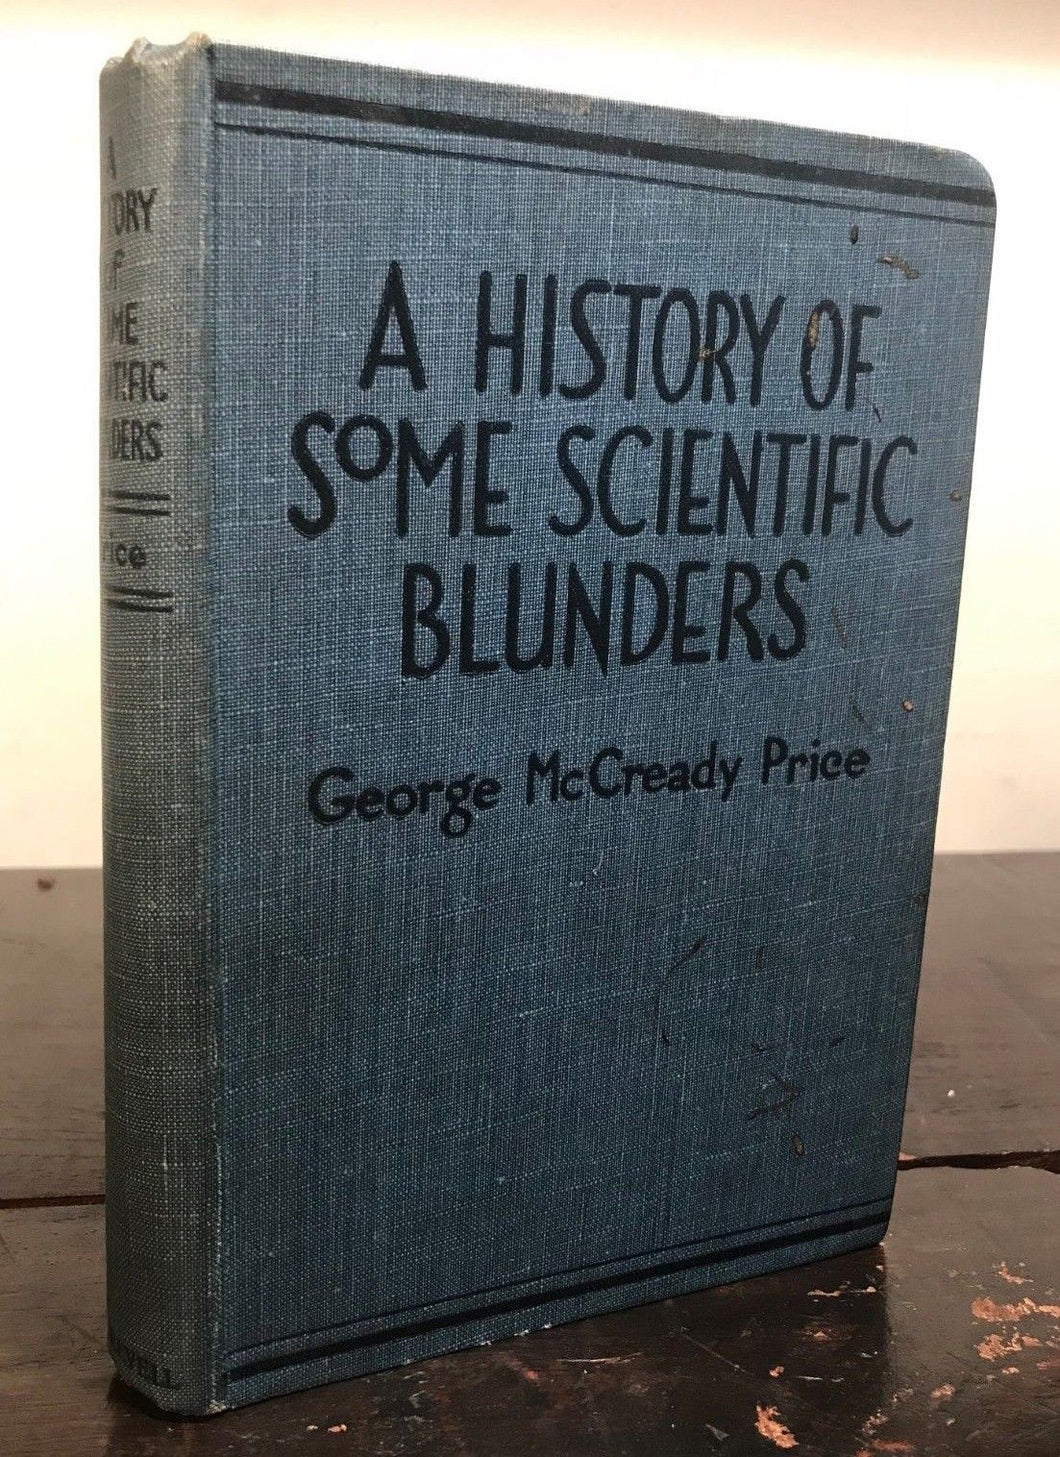 A HISTORY OF SOME SCIENTIFIC BLUNDERS - George Price, 1930 - Science Errors